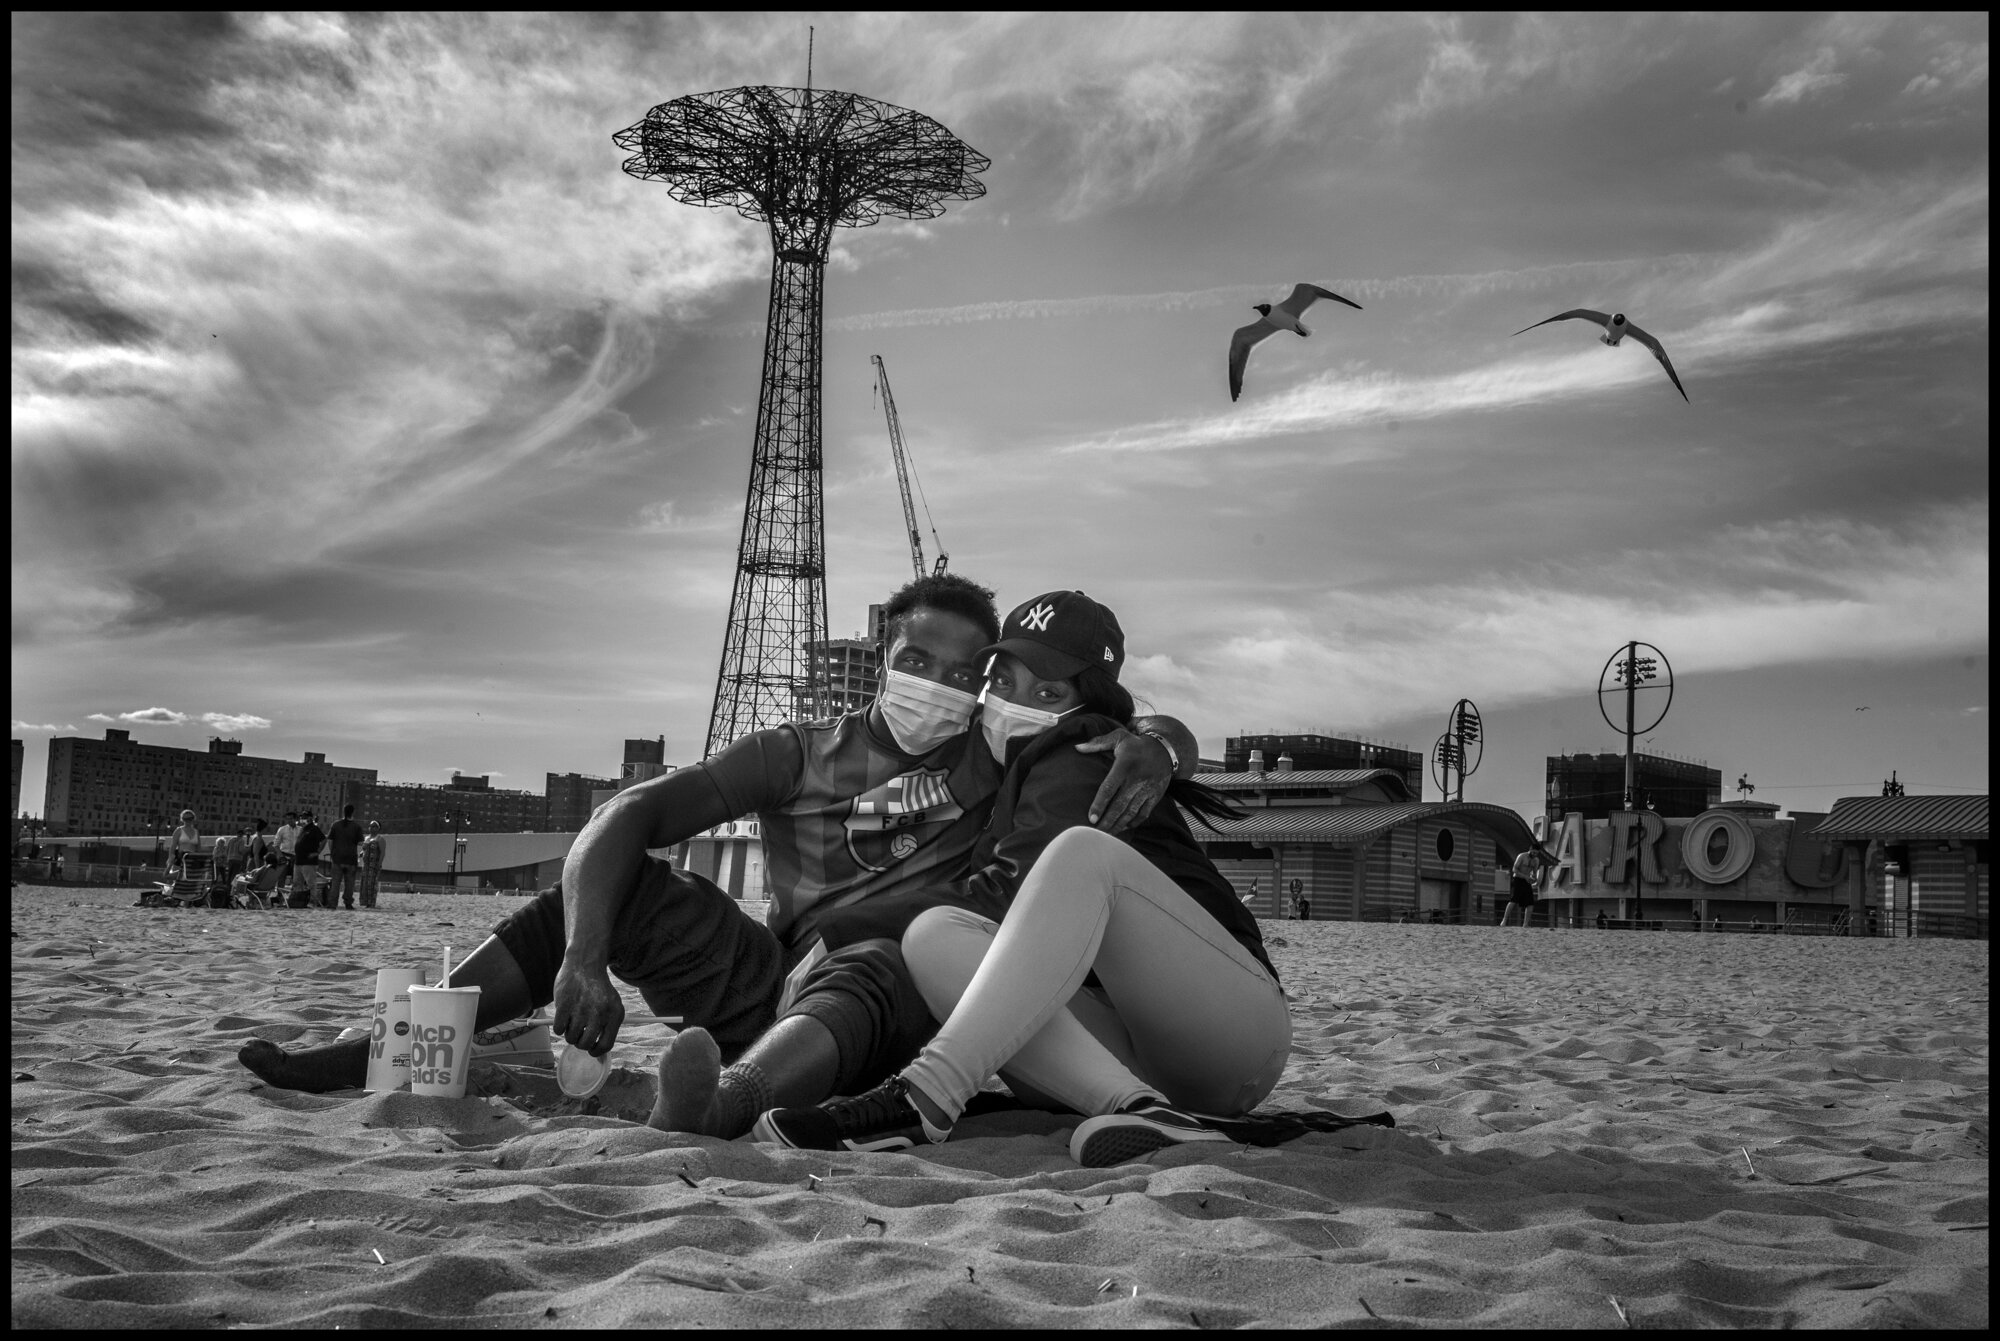  George and Regina, both born in Haiti, have known each other for a long time-but their romance is young, and they sat, both masked, clearly joyful to be outside, and together. Coney Island, Brooklyn, New York.  May 16, 2020. © Peter Turnley.  ID# 49